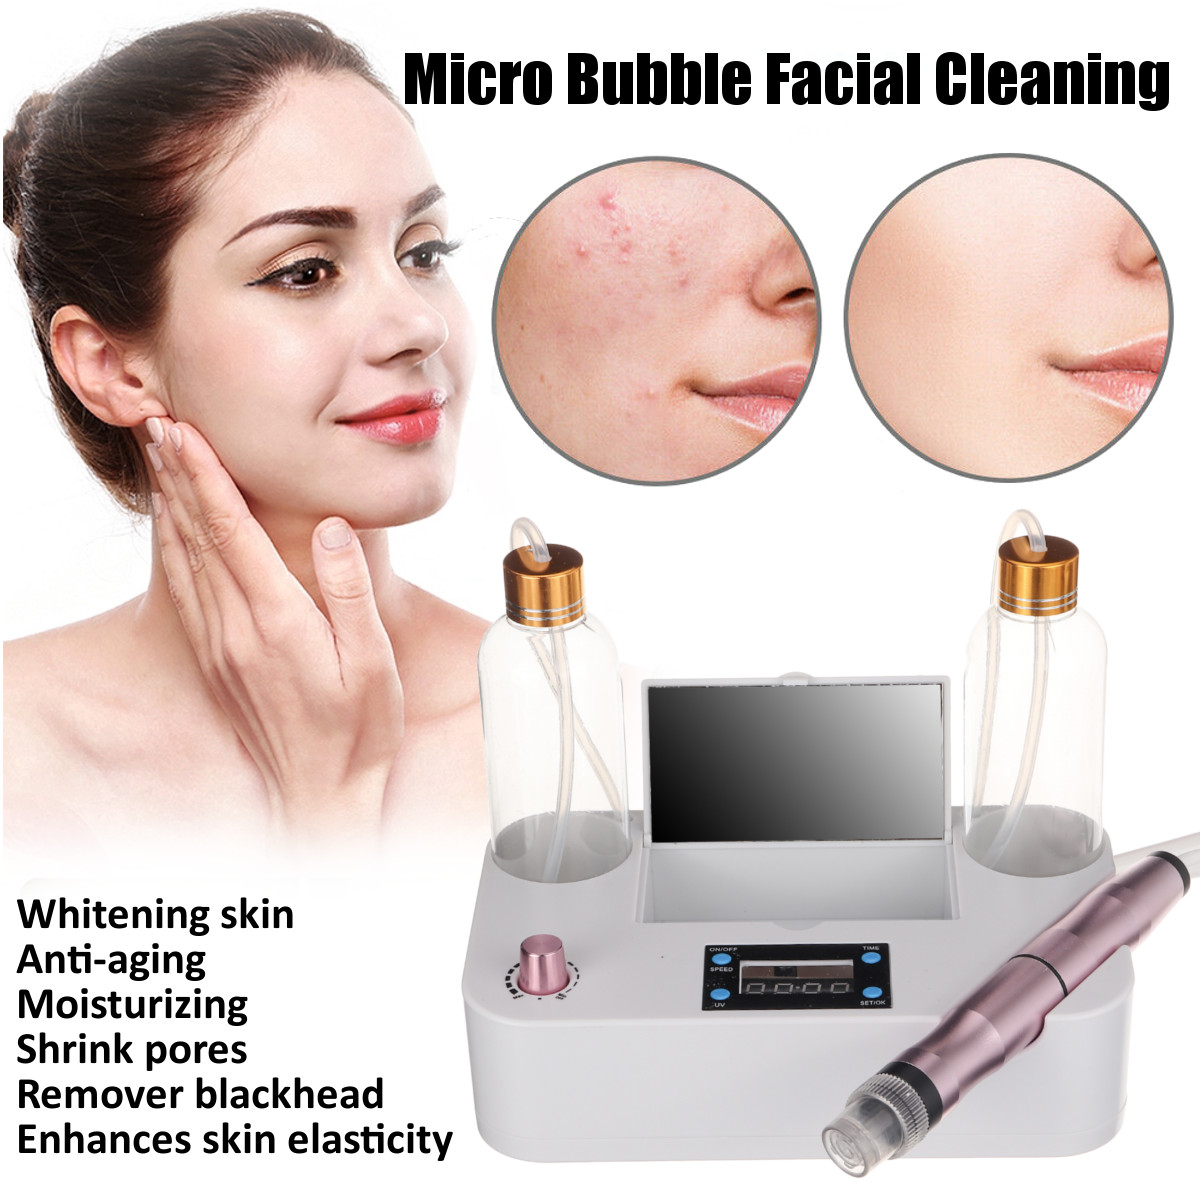 Micro-Small-Bubble-Facial-Cleaning-Face-Skin-Exfoliating-Machine-Whitening-Anti-aging-Acne-Moisturiz-1708280-3